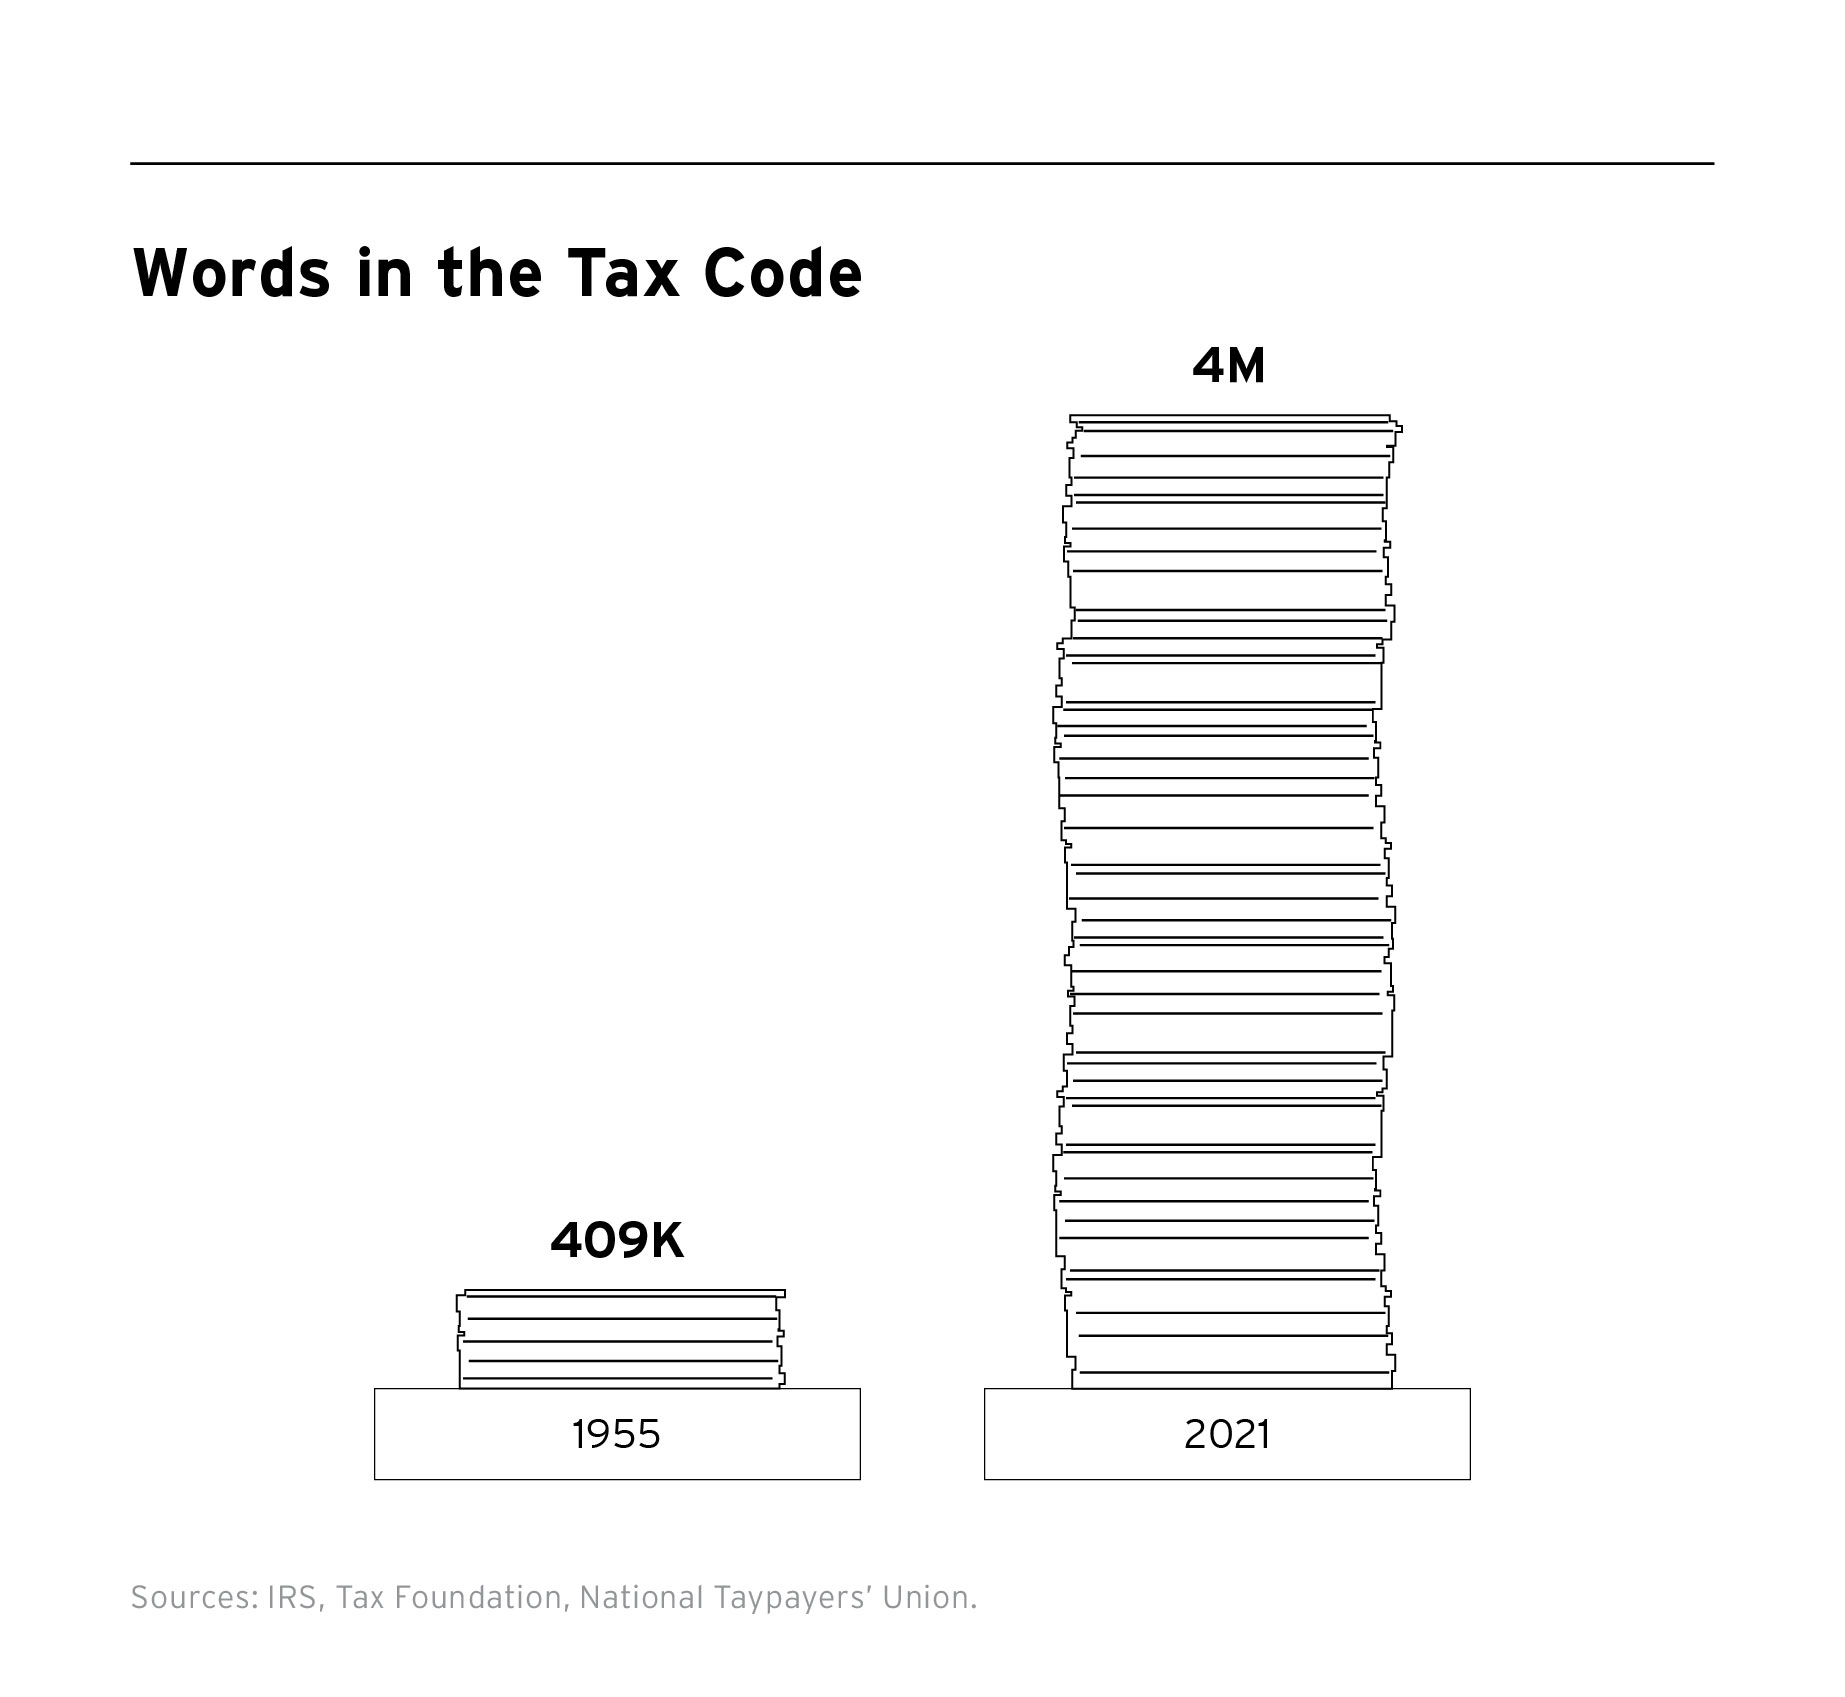 graph showing the difference in words in the Tax Code between 1955 and 2021